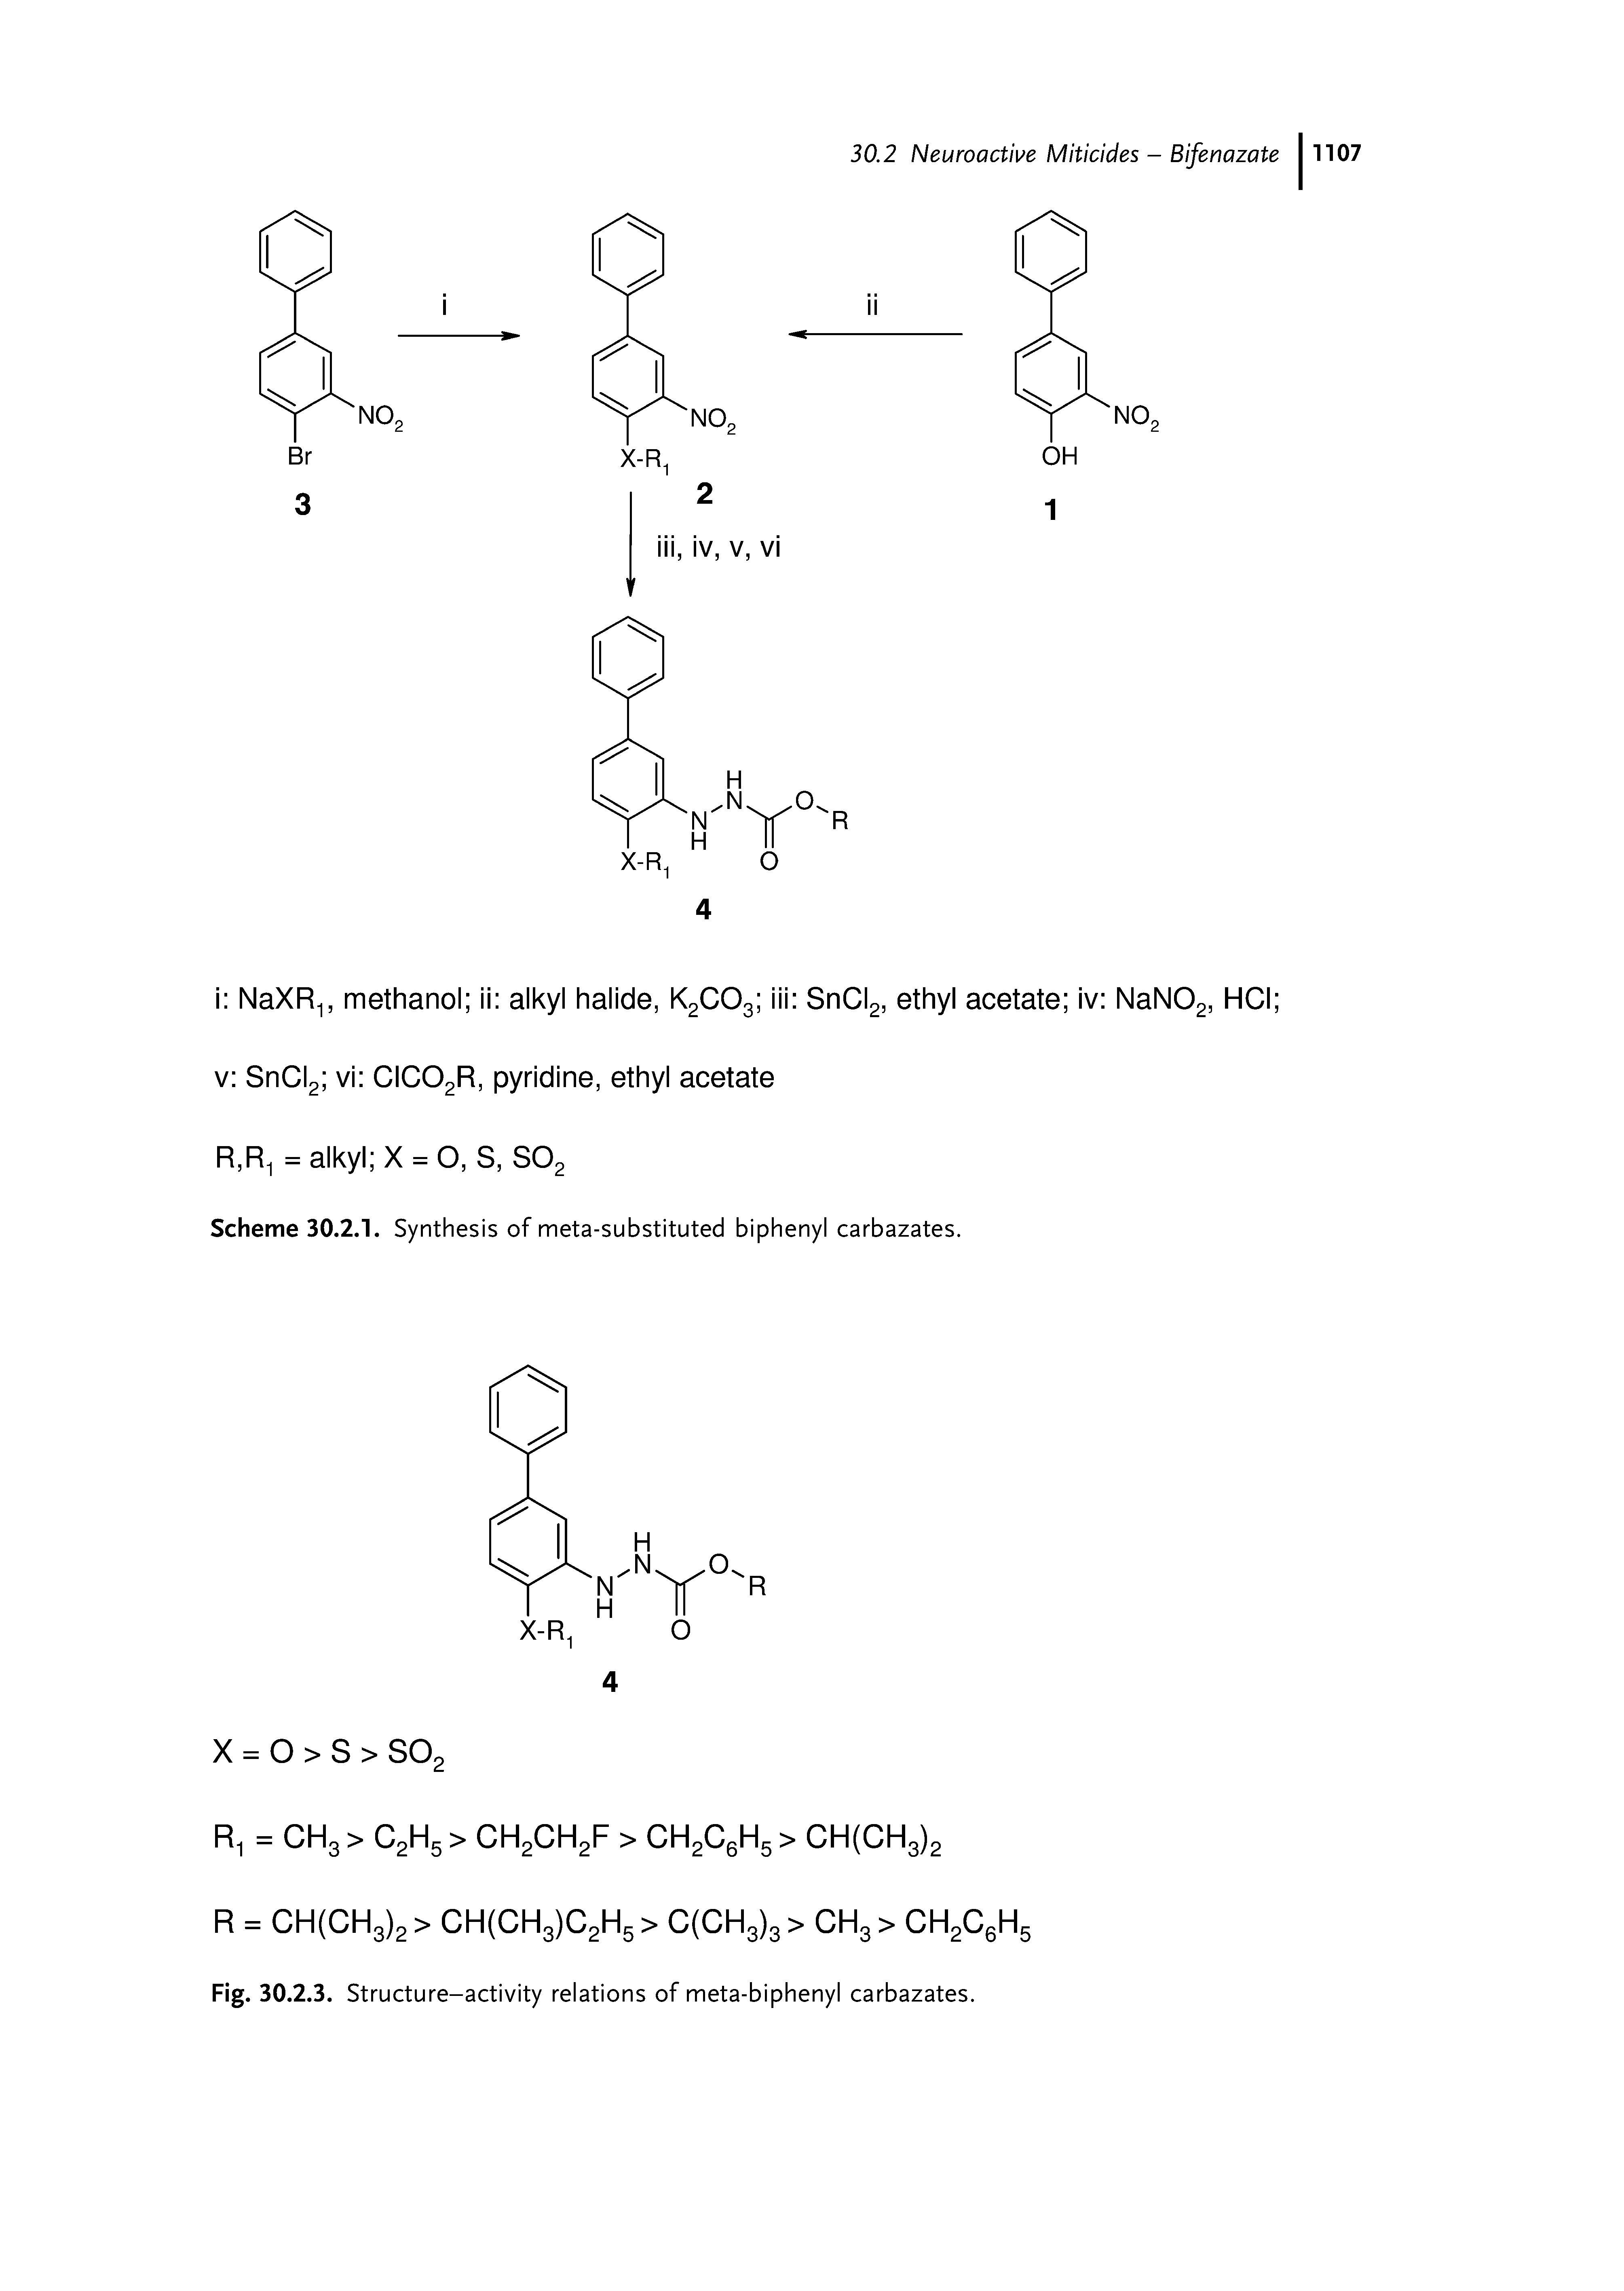 Scheme 30.2.1. Synthesis of meta-substituted biphenyl carbazates.